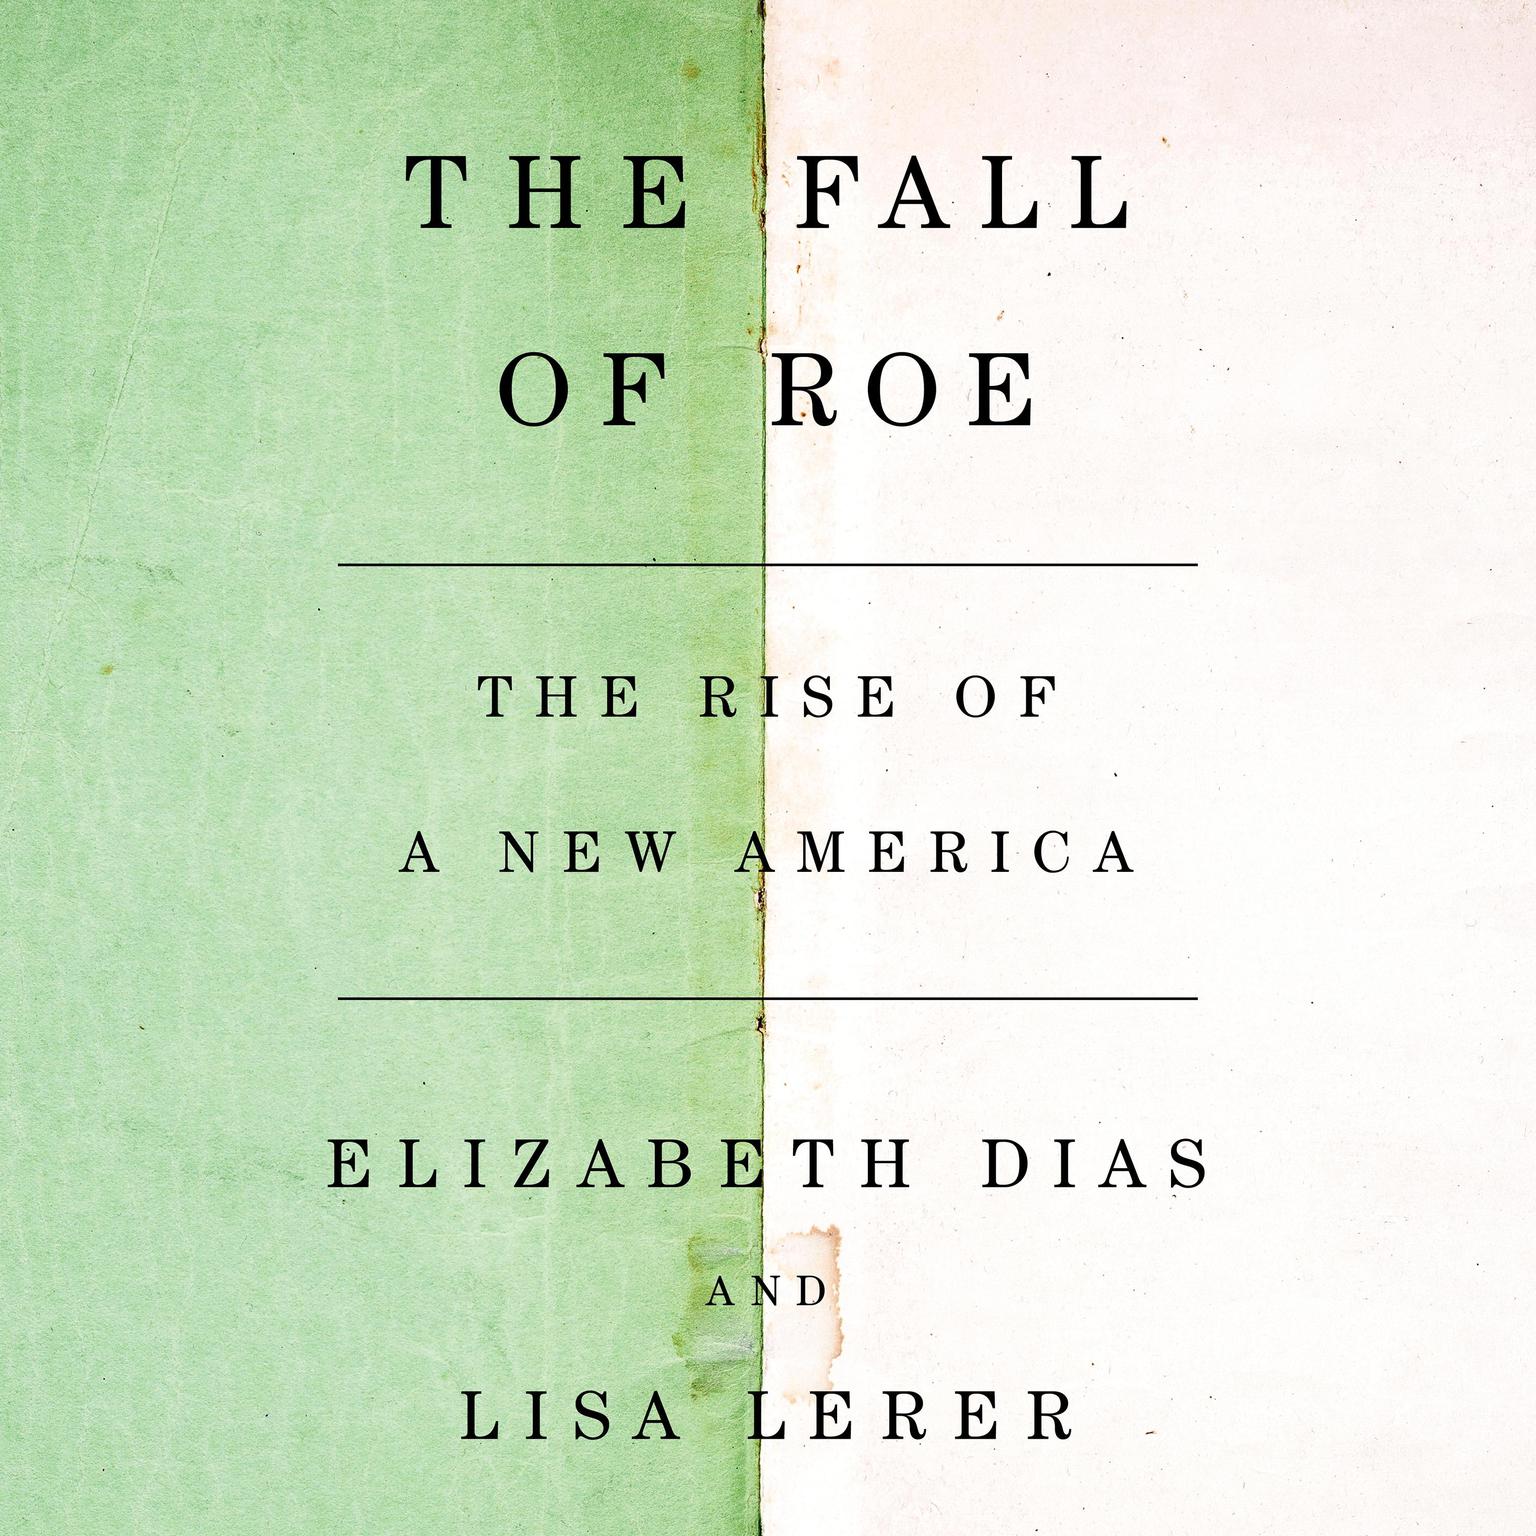 The Fall of Roe: The Rise of a New America Audiobook, by Elizabeth Dias